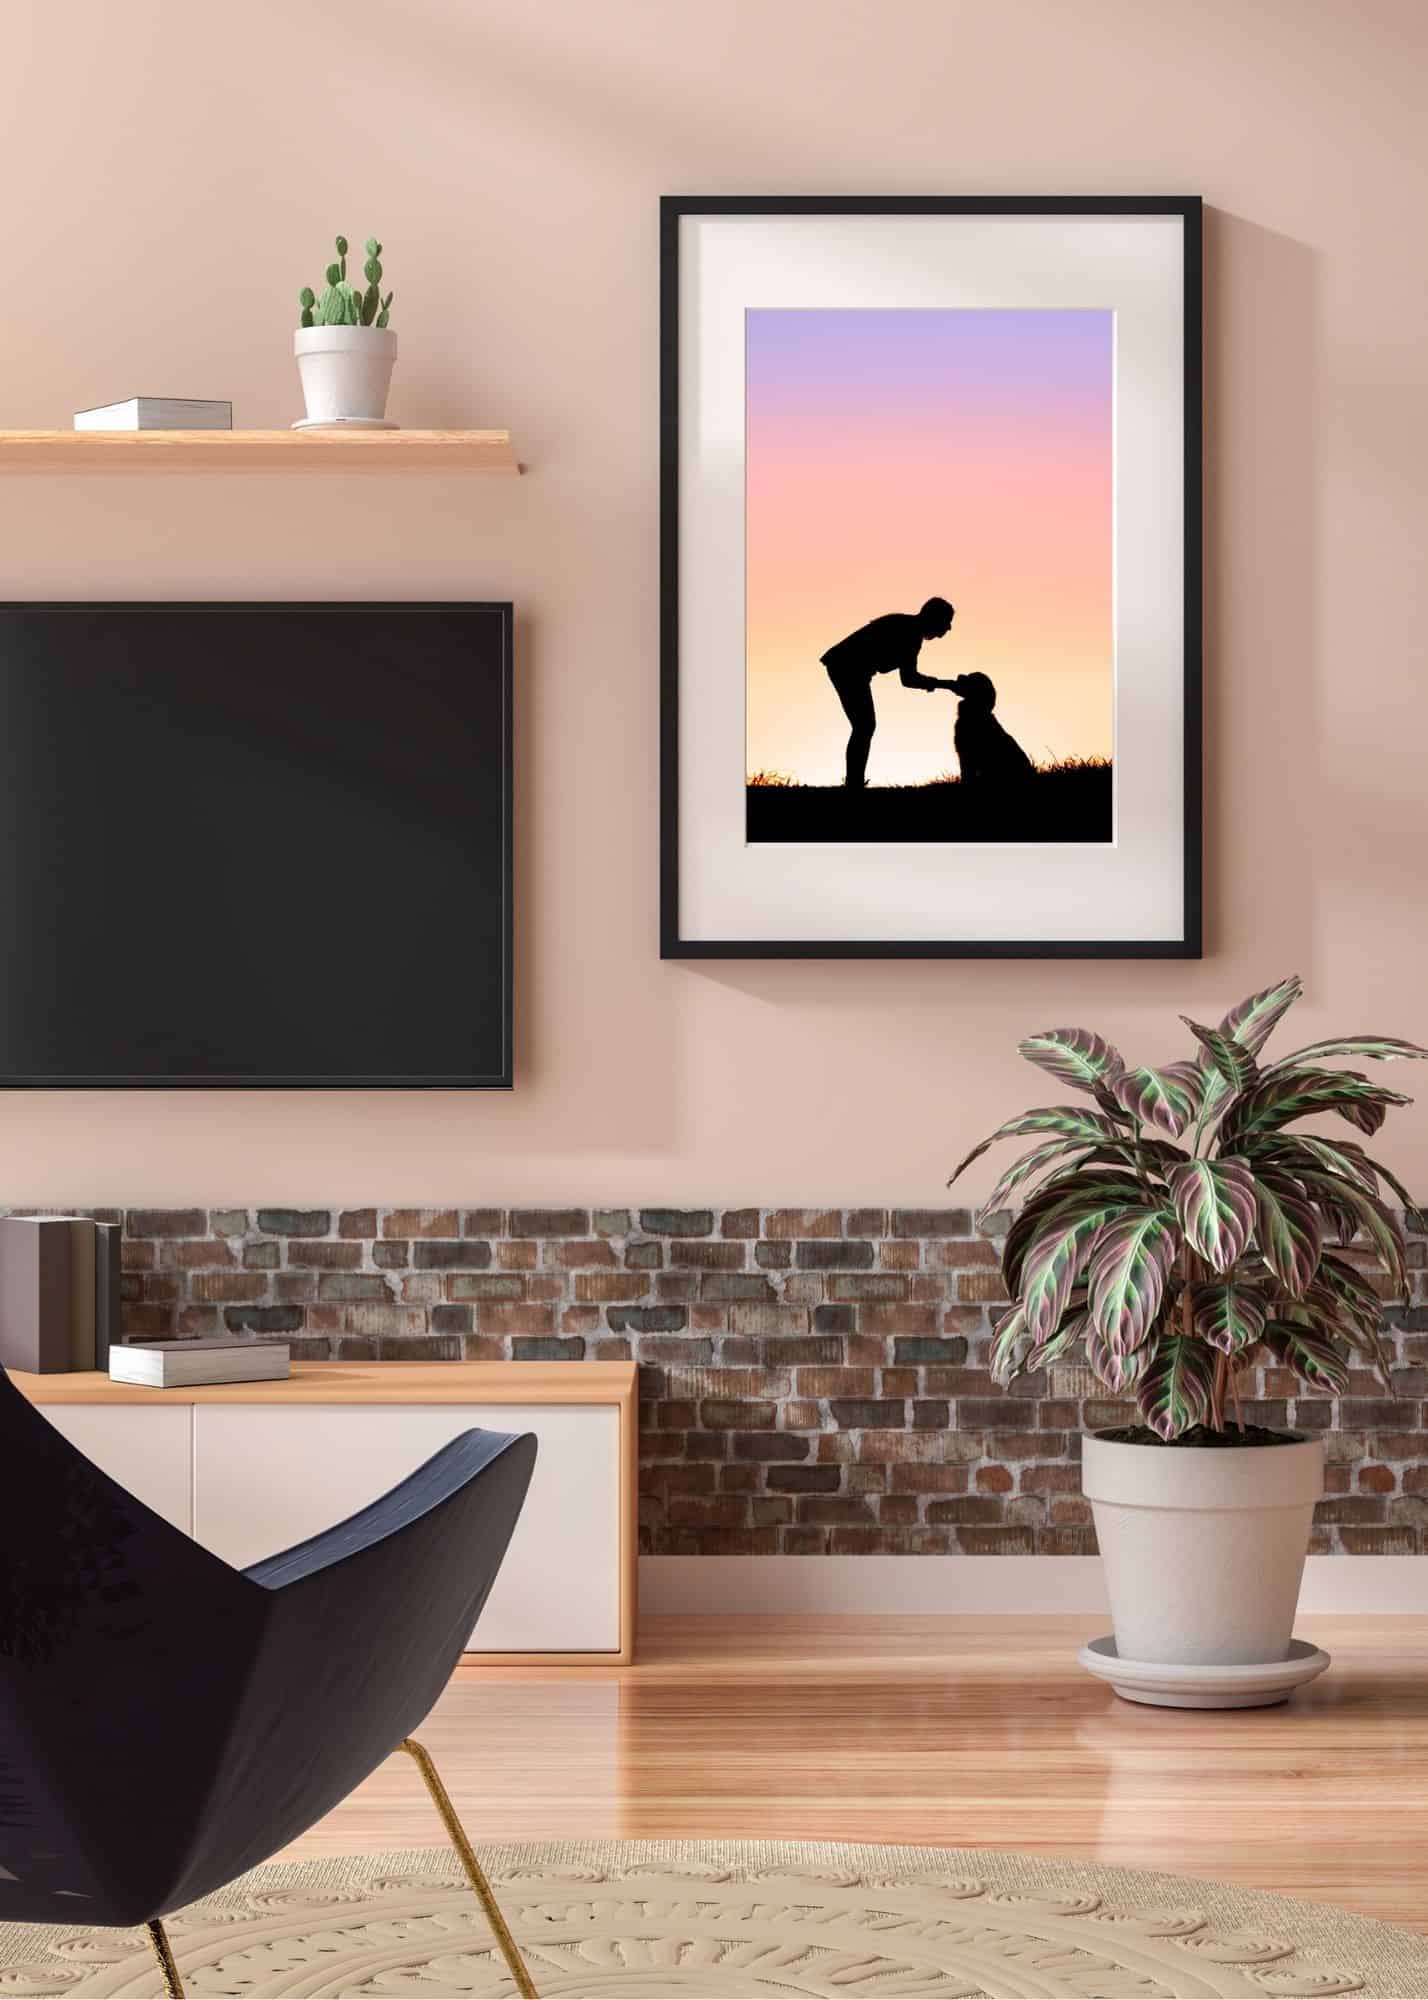 pale pink modern living room with a black framed and matted photo of a woman and her dog in silhouette against a sunset sky of pinks and purples